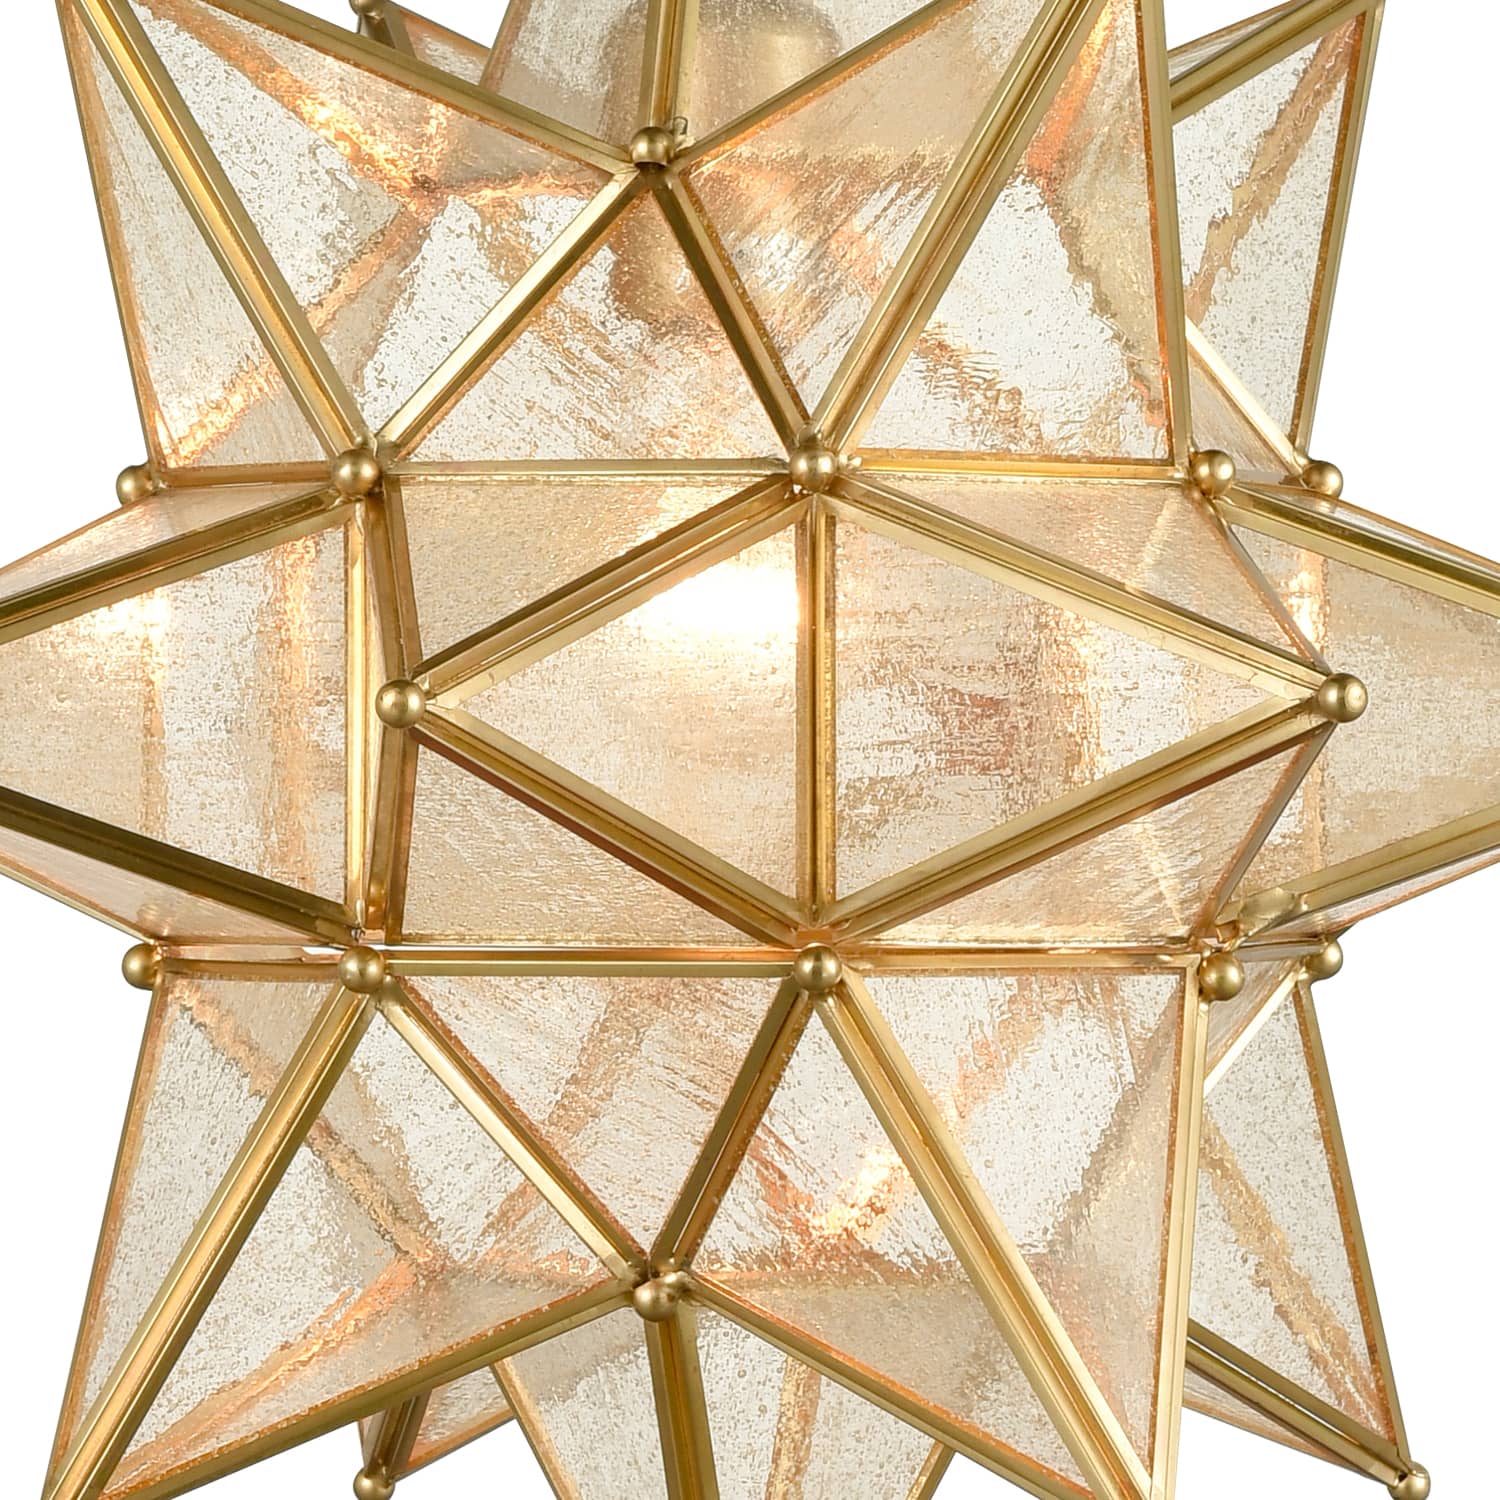 Moravian Star Pendant Chandelier Seeded Glass Gold Light 15 Inches